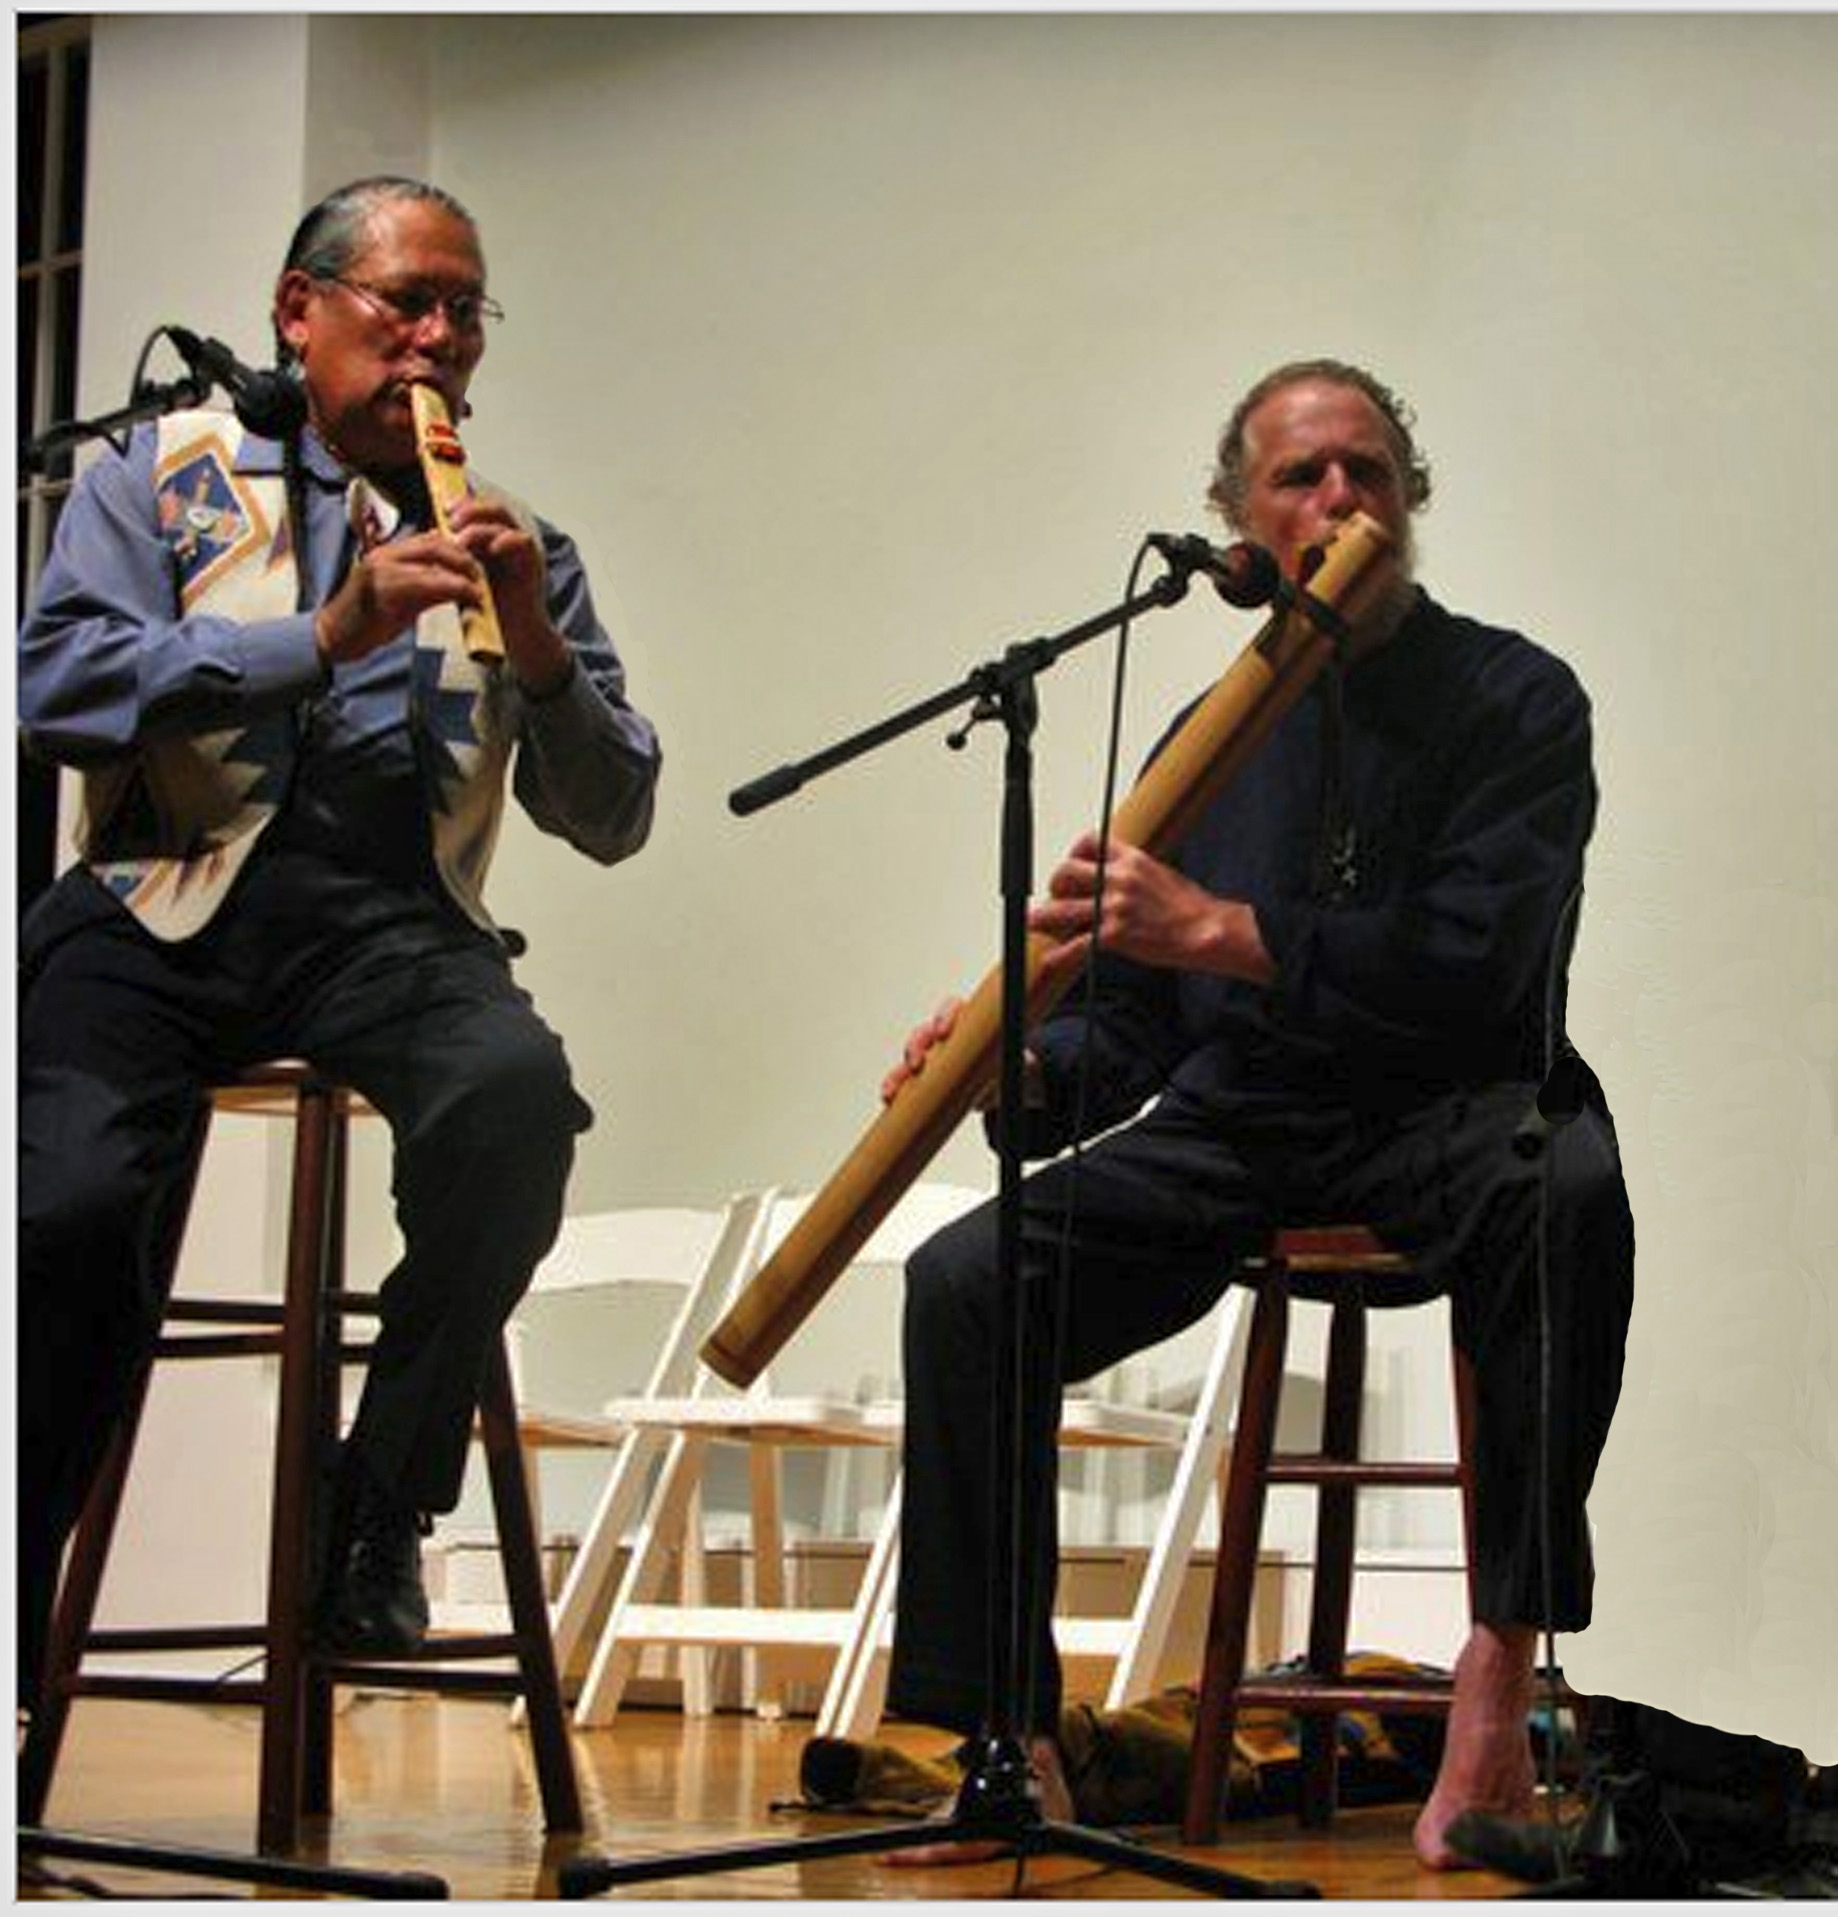 R. Carlos Nakai and William Waterway share a water song at National Geographic's 